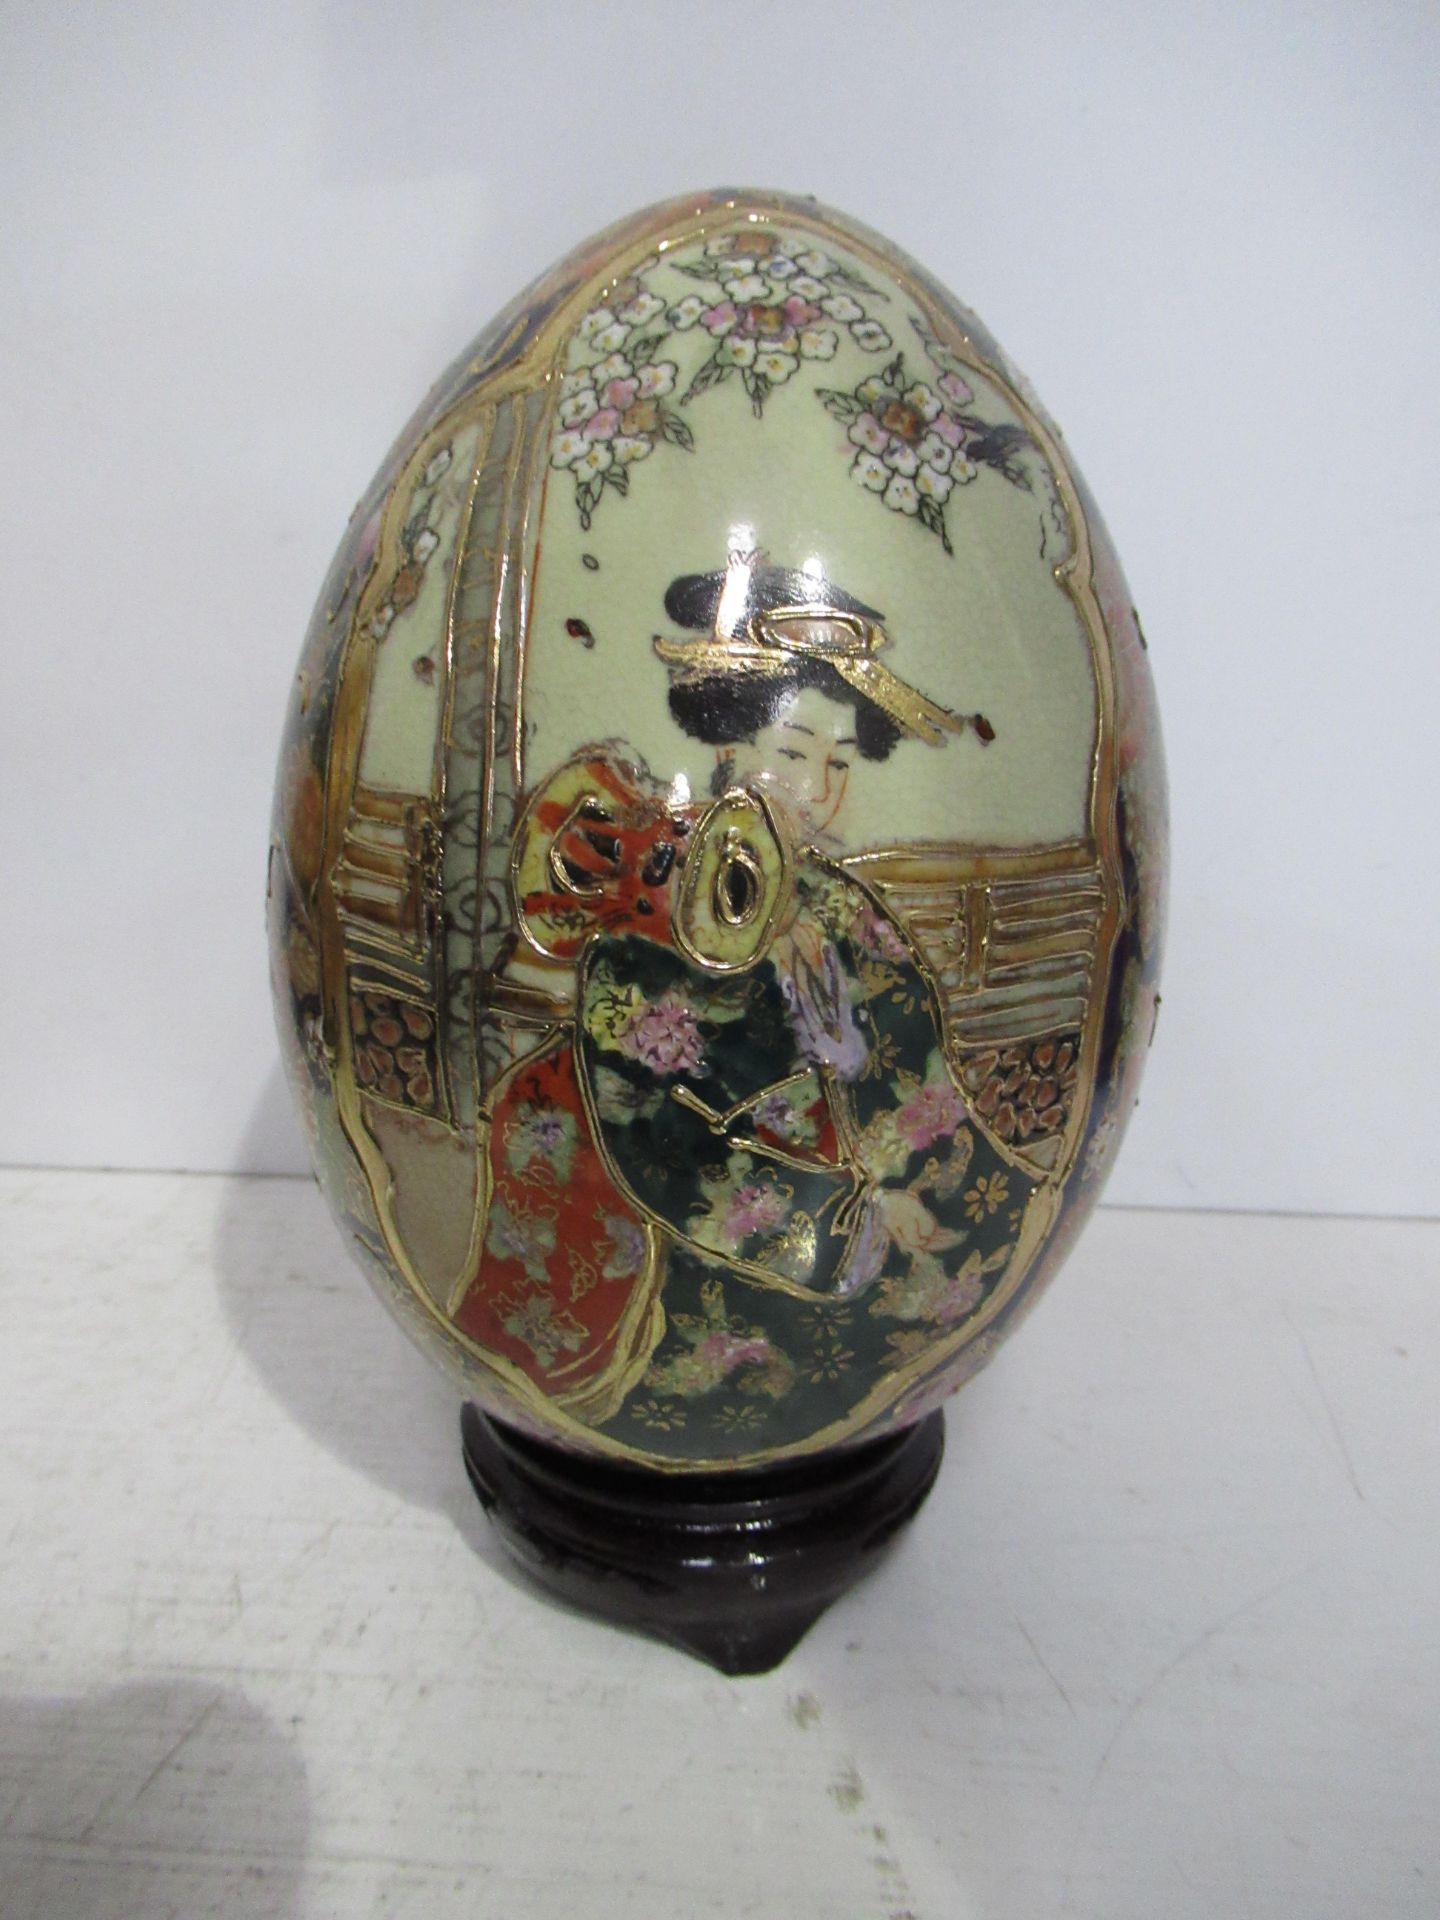 3 x Chinese Themed Painted Eggs with Five Stands (17.5cm) - Image 5 of 8